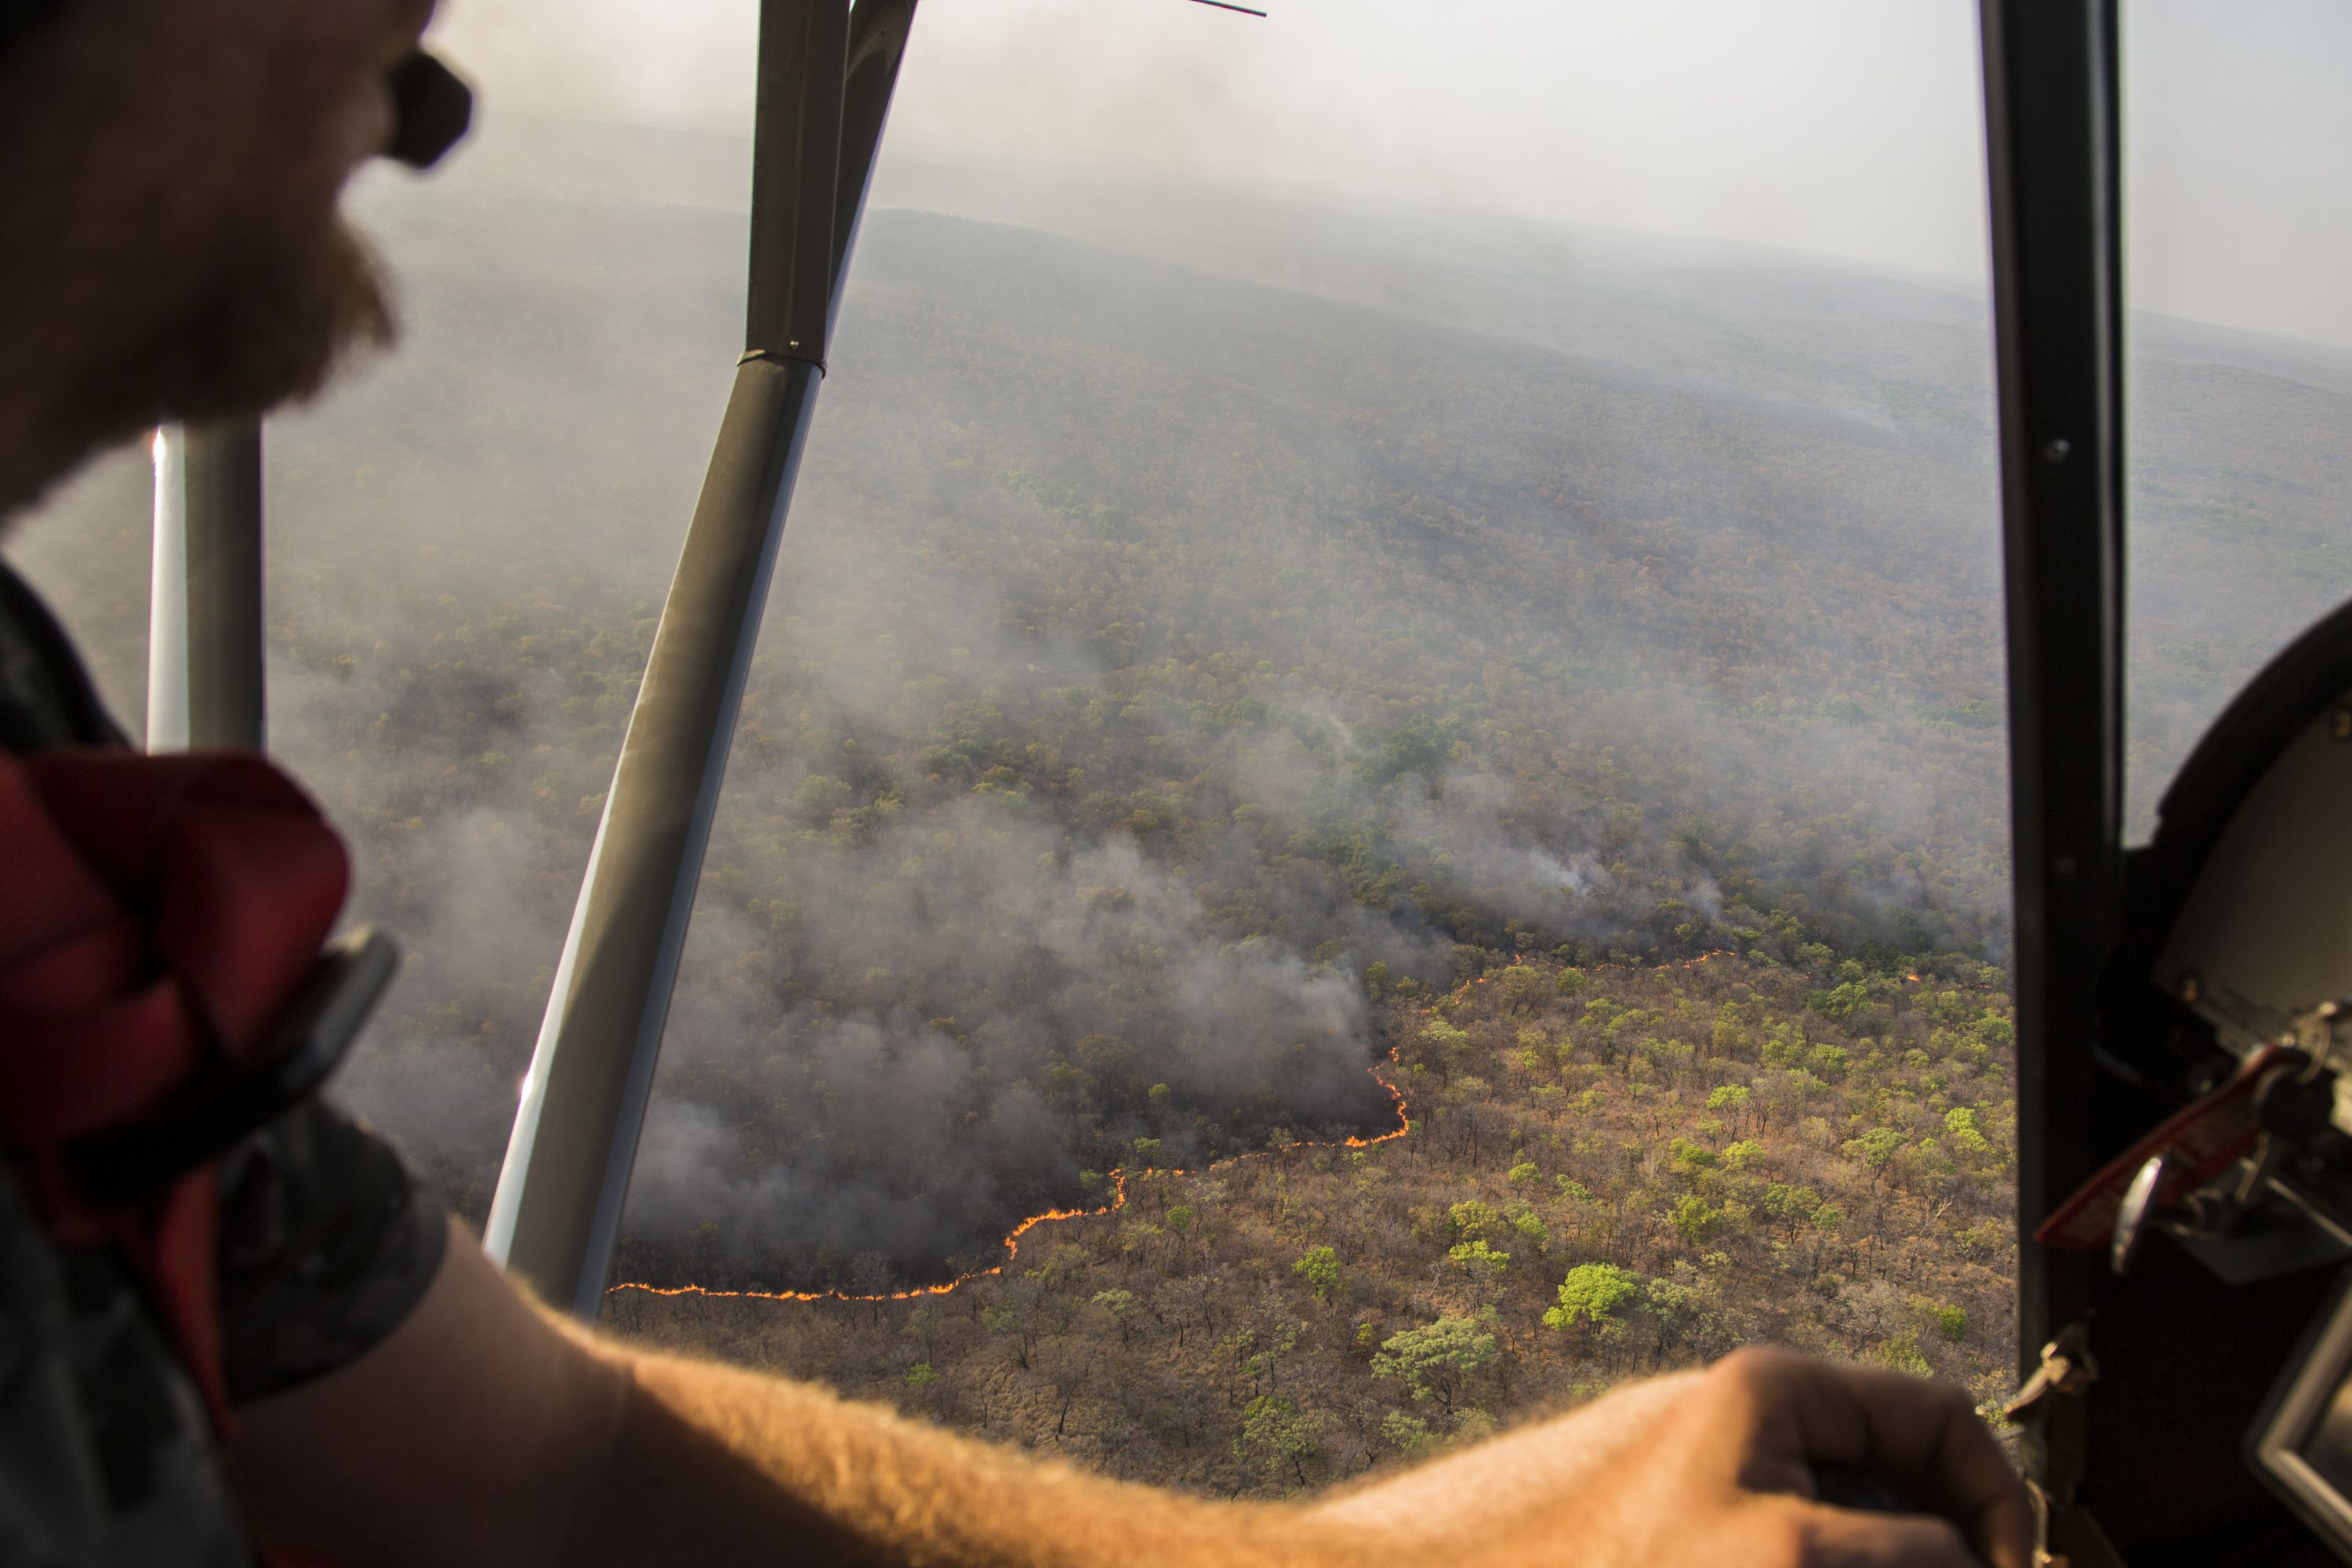 Cédric Ganière flies over a bush fire on the Chinko savannah in his tiny, two-seater plane during a mission to spot cattle herders and blazes. Image by Jack Losh. Central African Republic, 2018.